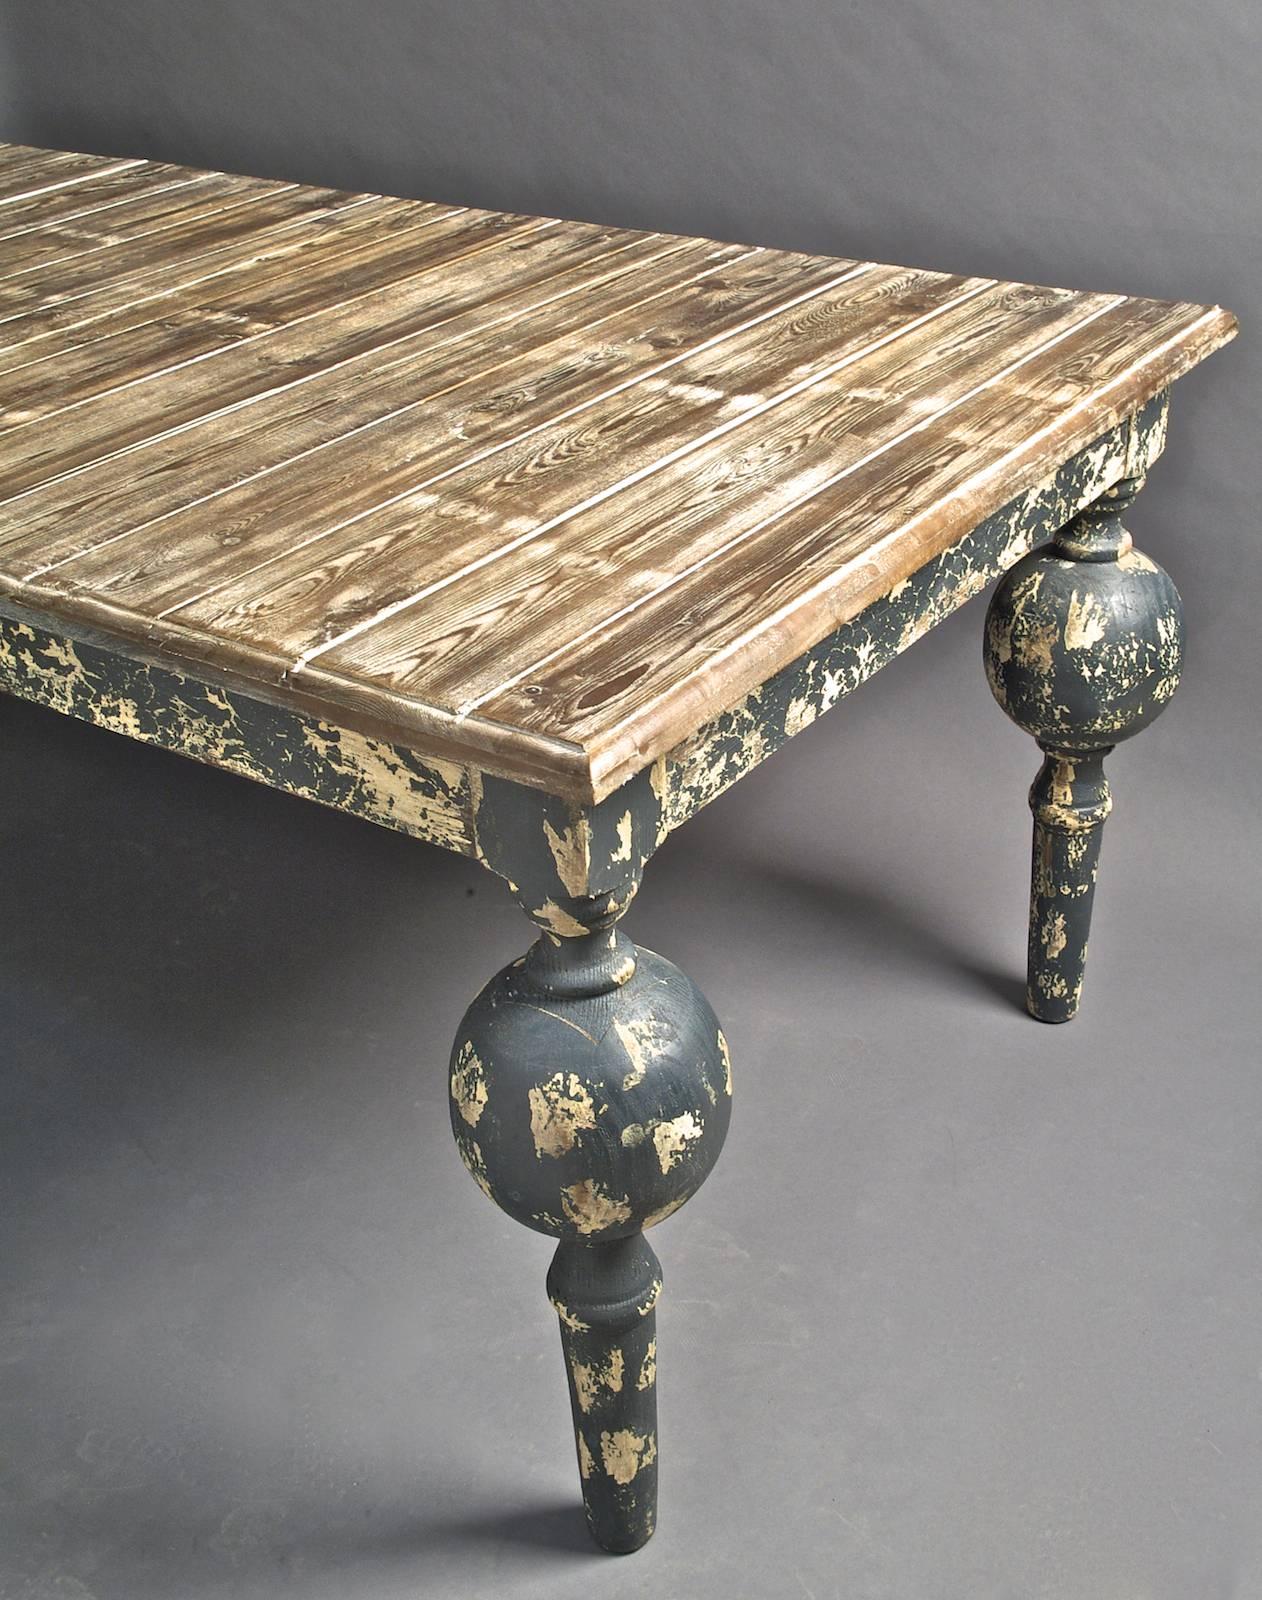 Exceptional Dutch-inspired table with balls feet - creation based on ancient elements - 
sophisticated patina 
France, 20th century - 
Dimensions: 220 x 98 x H.77 cm.